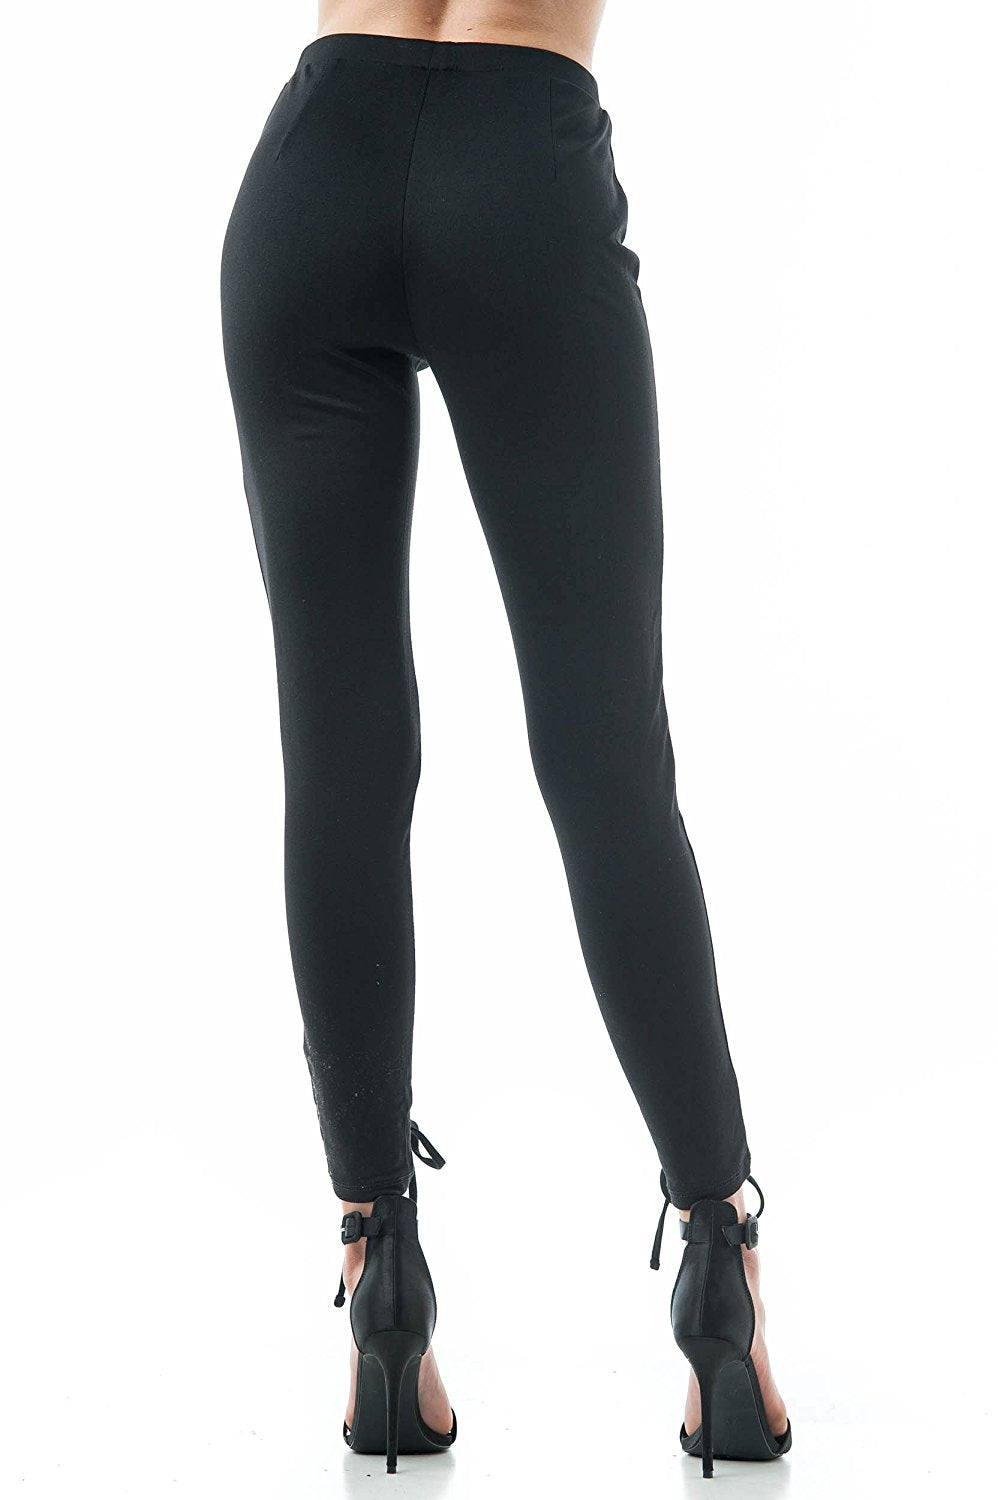 Lace Up Front Skinny Ankle Ponte Legging Pants